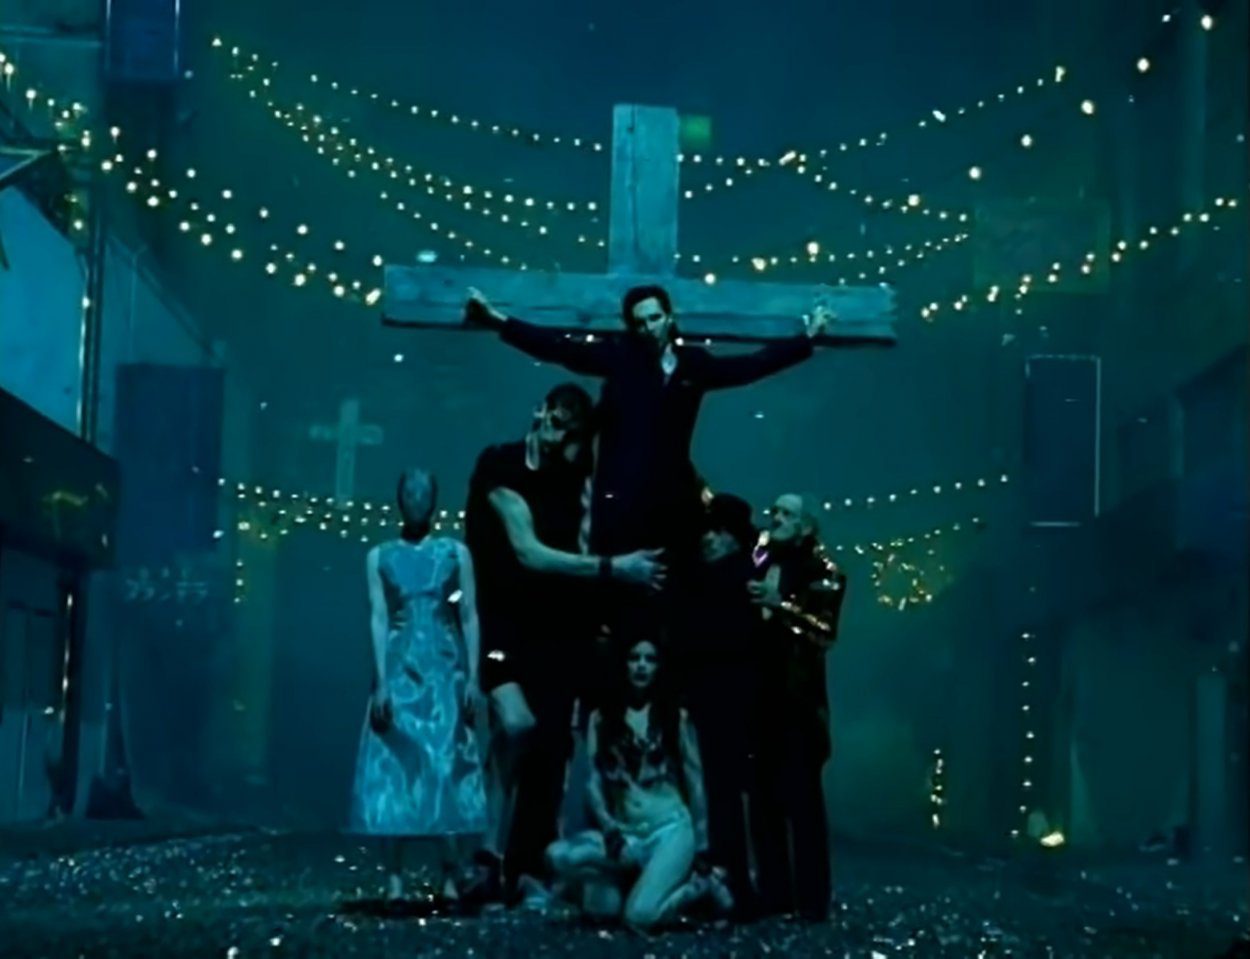 Marilyn Manson hanging from a crucifix surrounded by an odd assortment of people in the "Coma White" music video